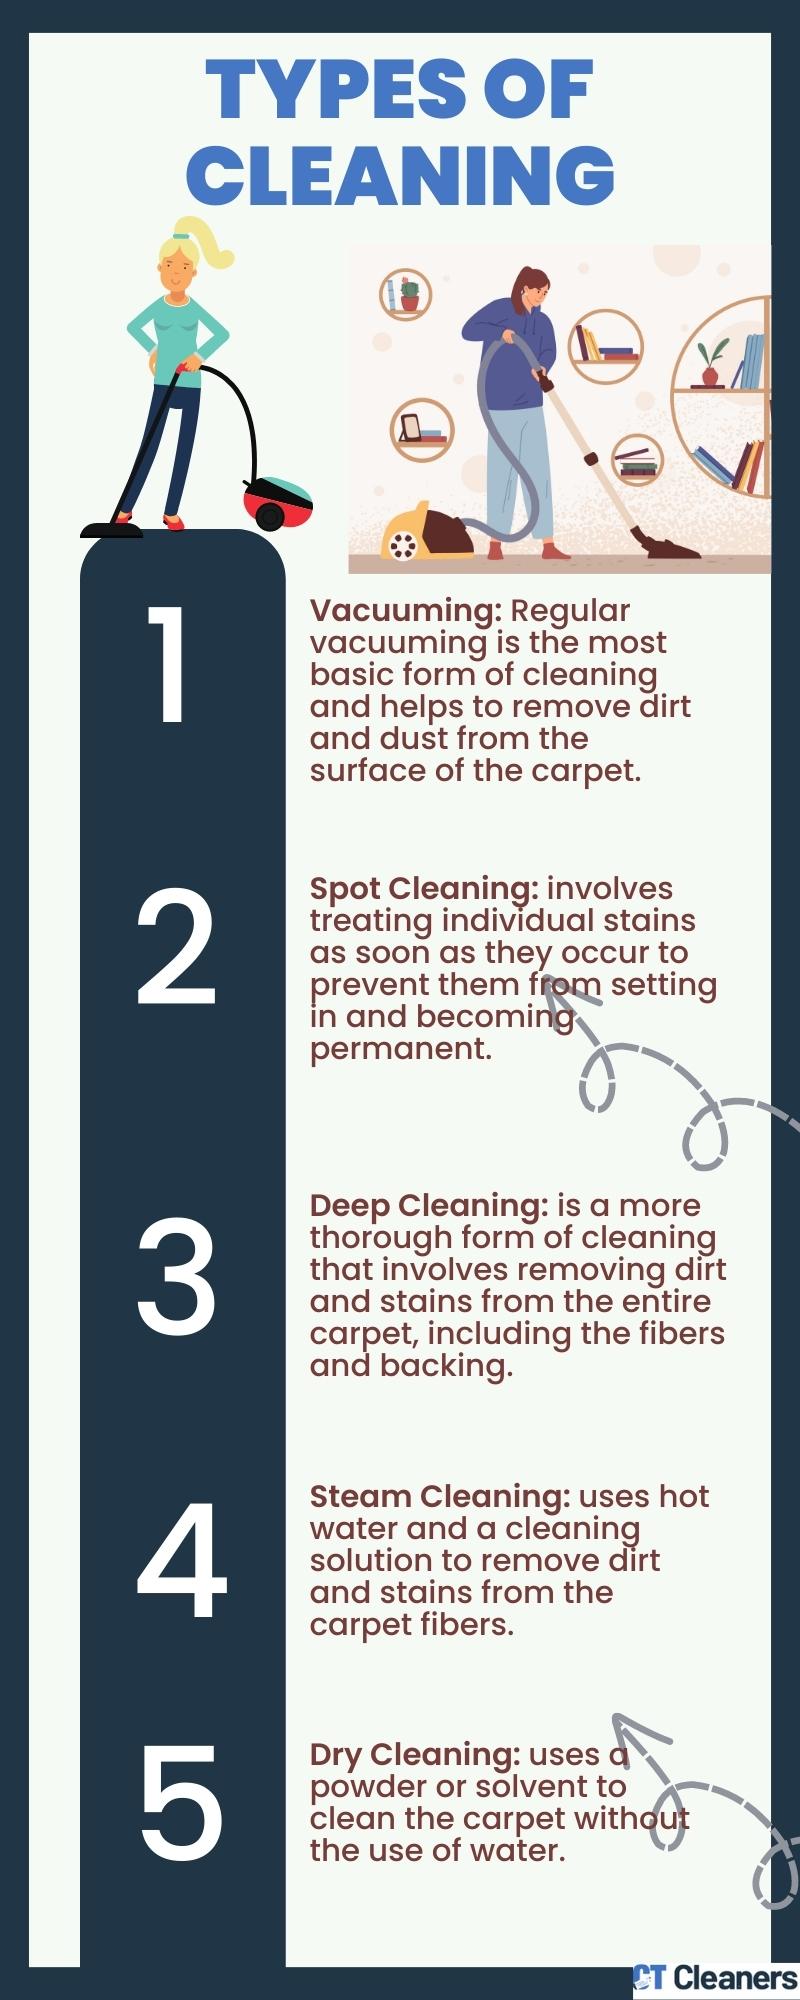 Types of Cleaning (1)